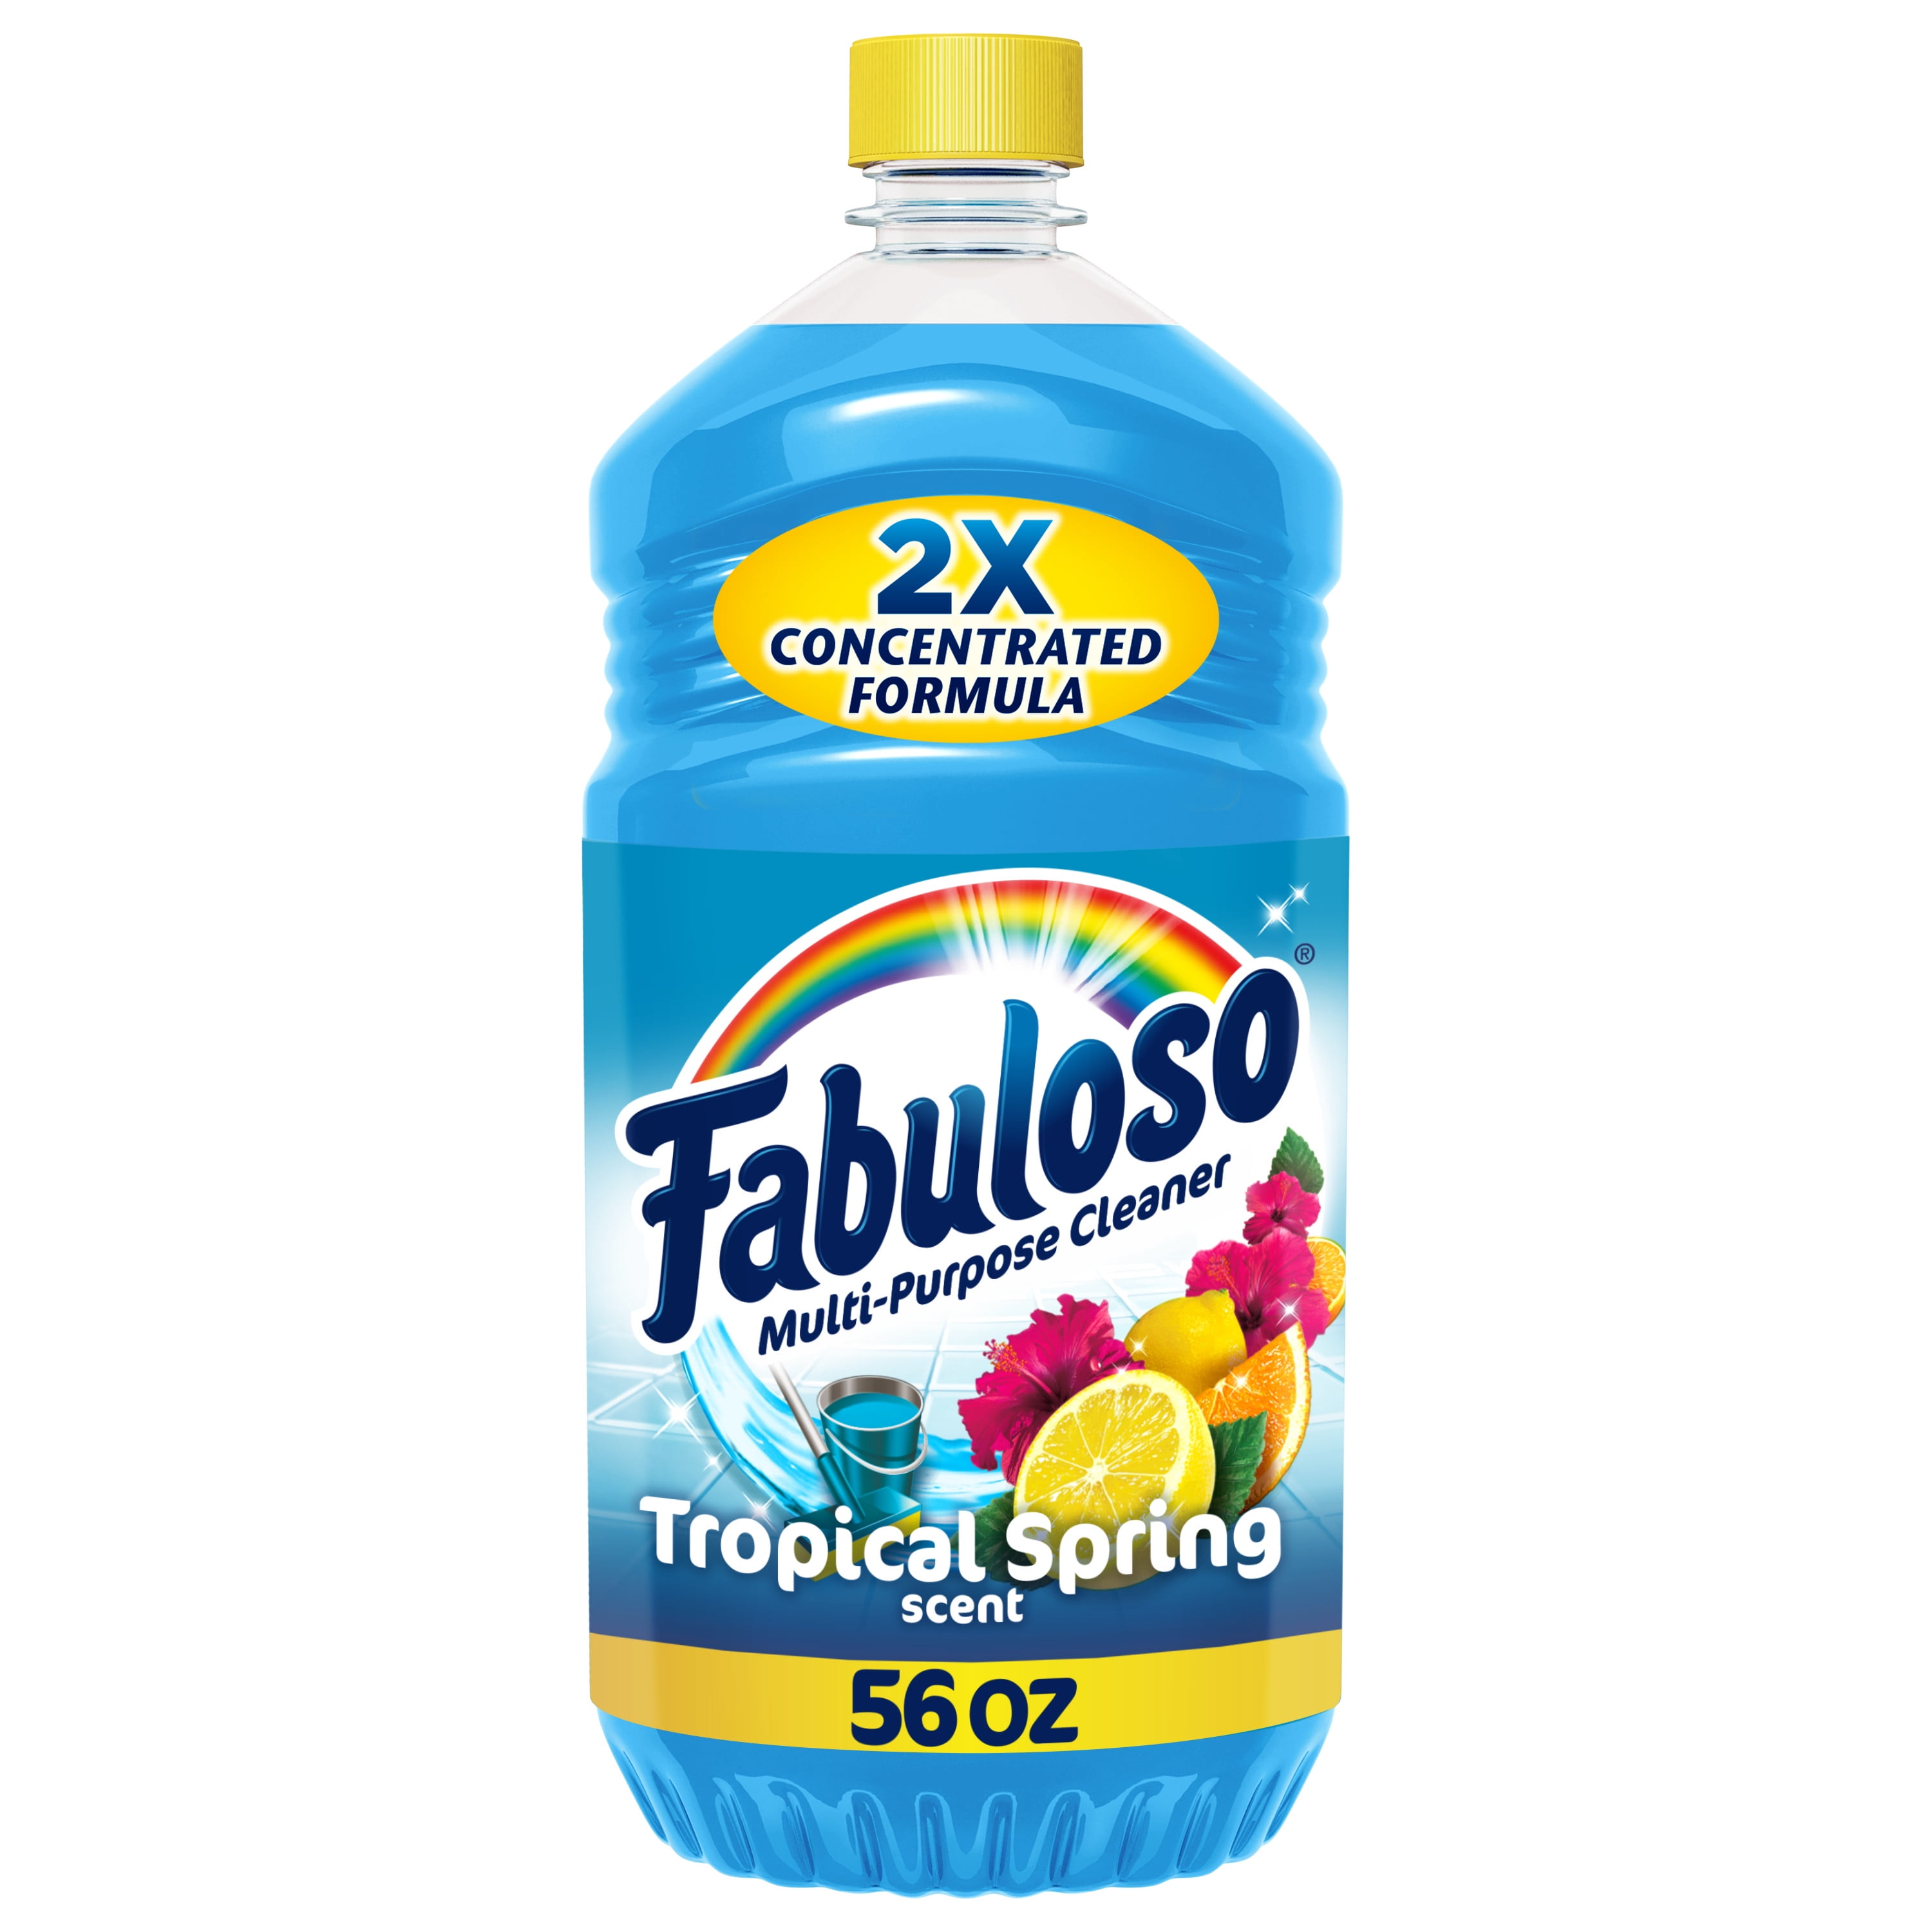 Fabuloso Multi-Purpose Cleaner, 2X Concentrated Formula, Tropical Spring Scent, 56 fl oz